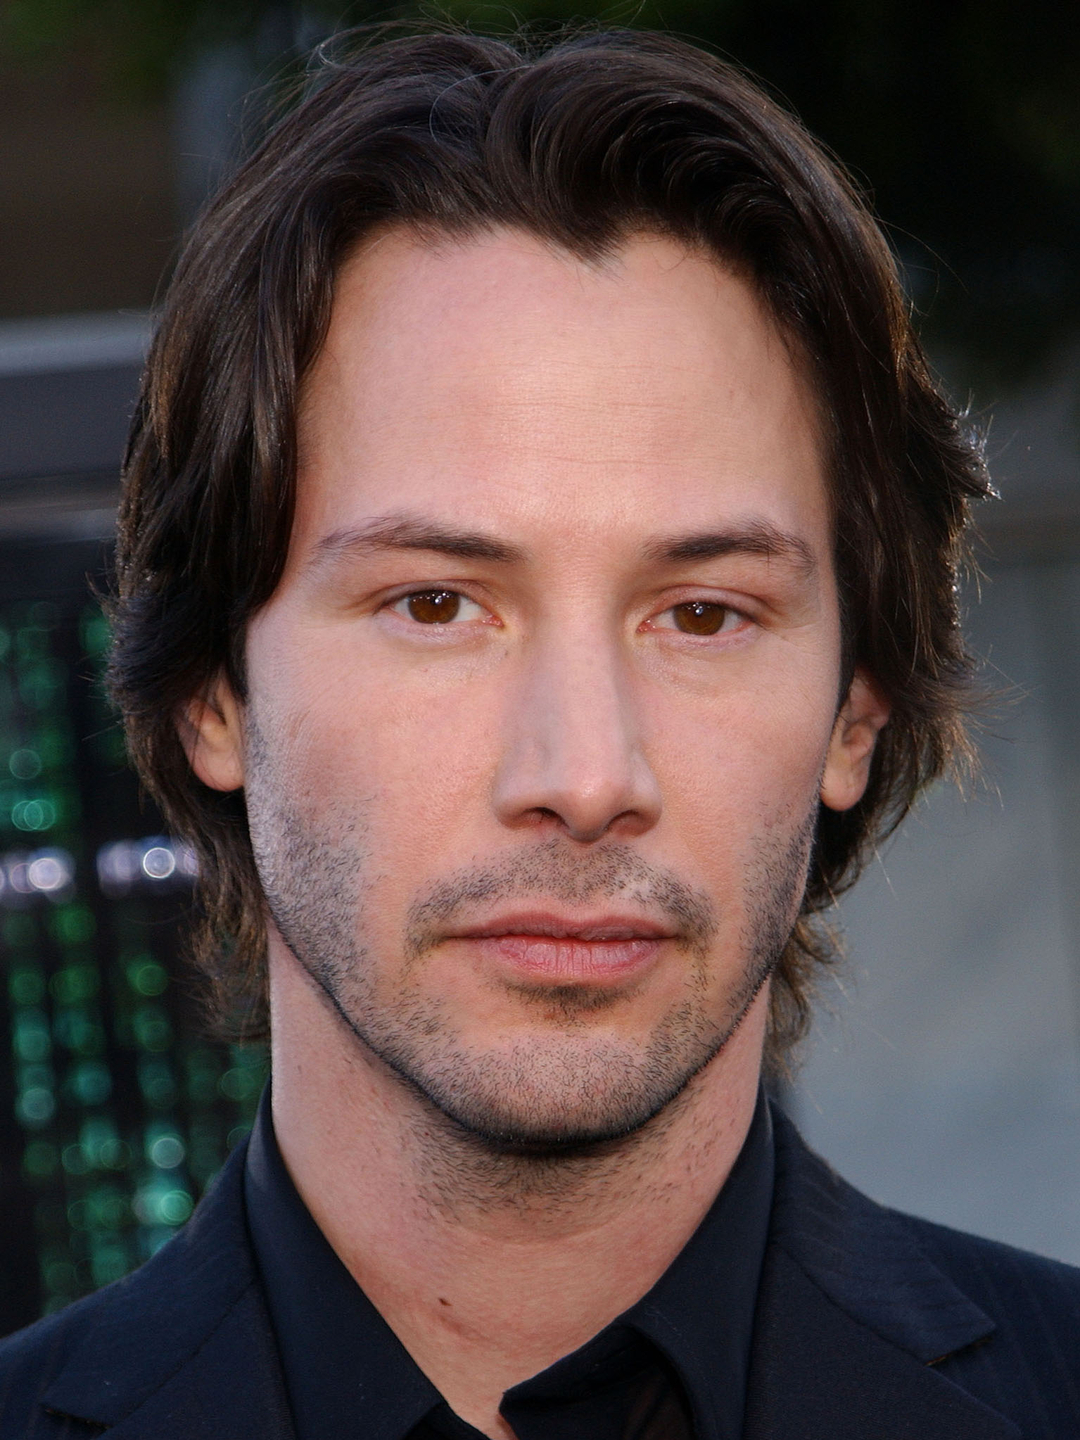 Keanu Reeves who is his mother